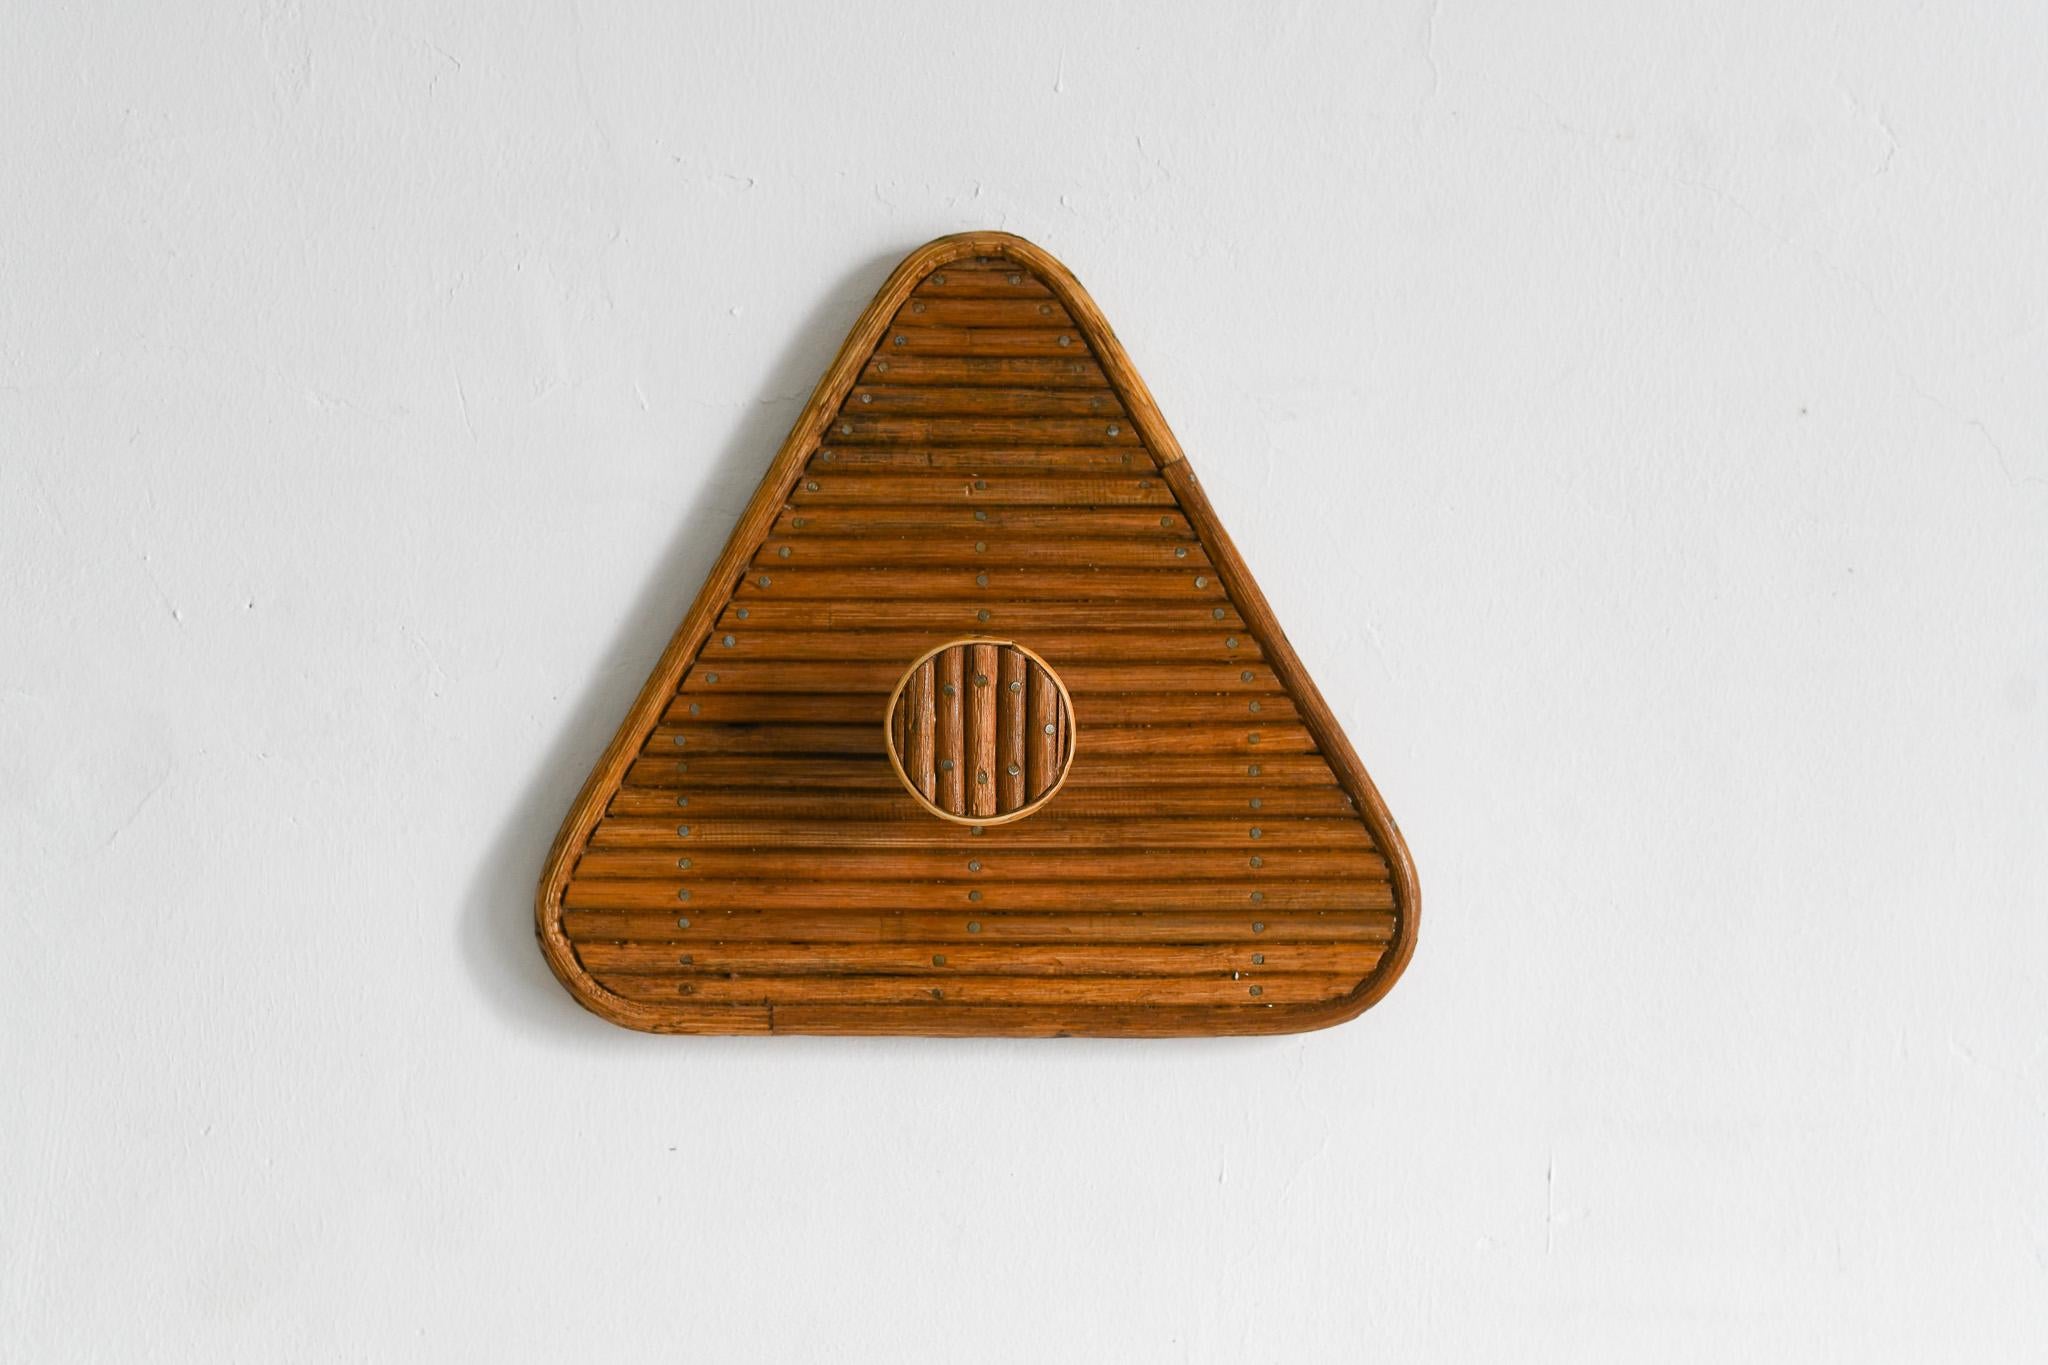 This elegant Triangle Shaped Rattan Wall Hook is the perfect addition to any room. Its mid-century Italian design in a rattan core with a triangle shape is ideal for entryways, bathrooms, and bedrooms. Installation is simple, and its modern and